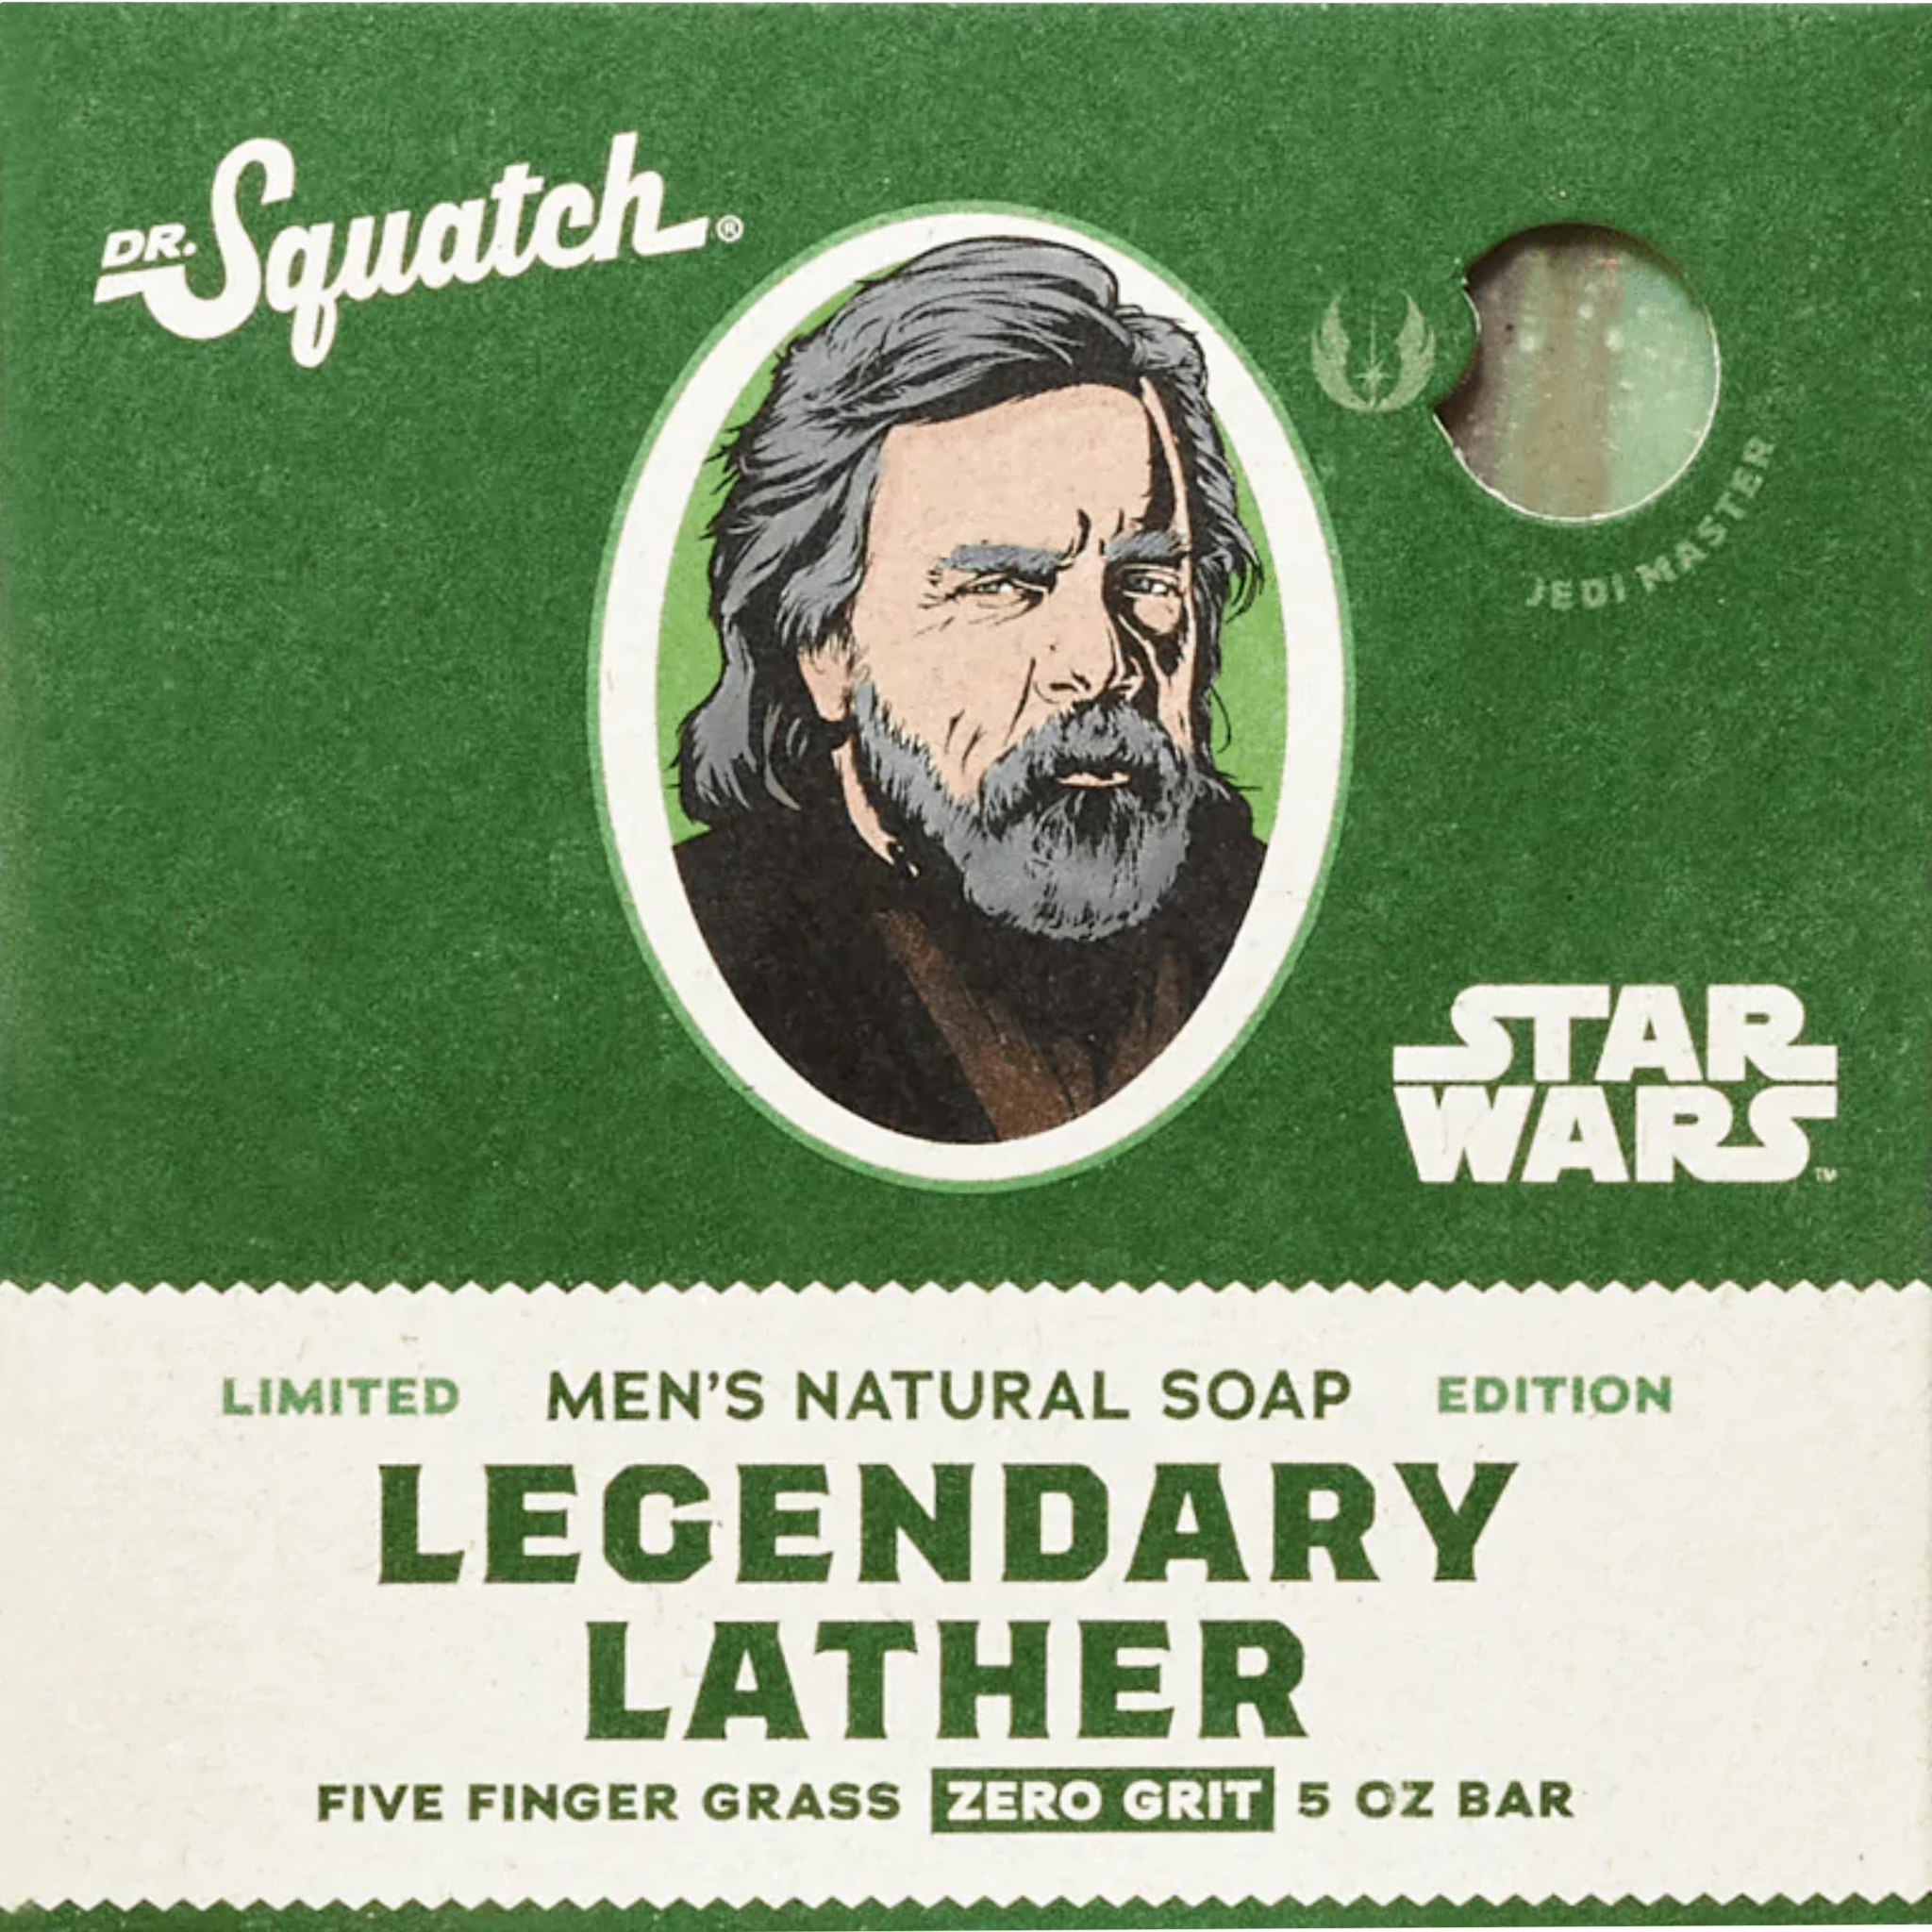 Star Wars Collection I - Dr. Squatch